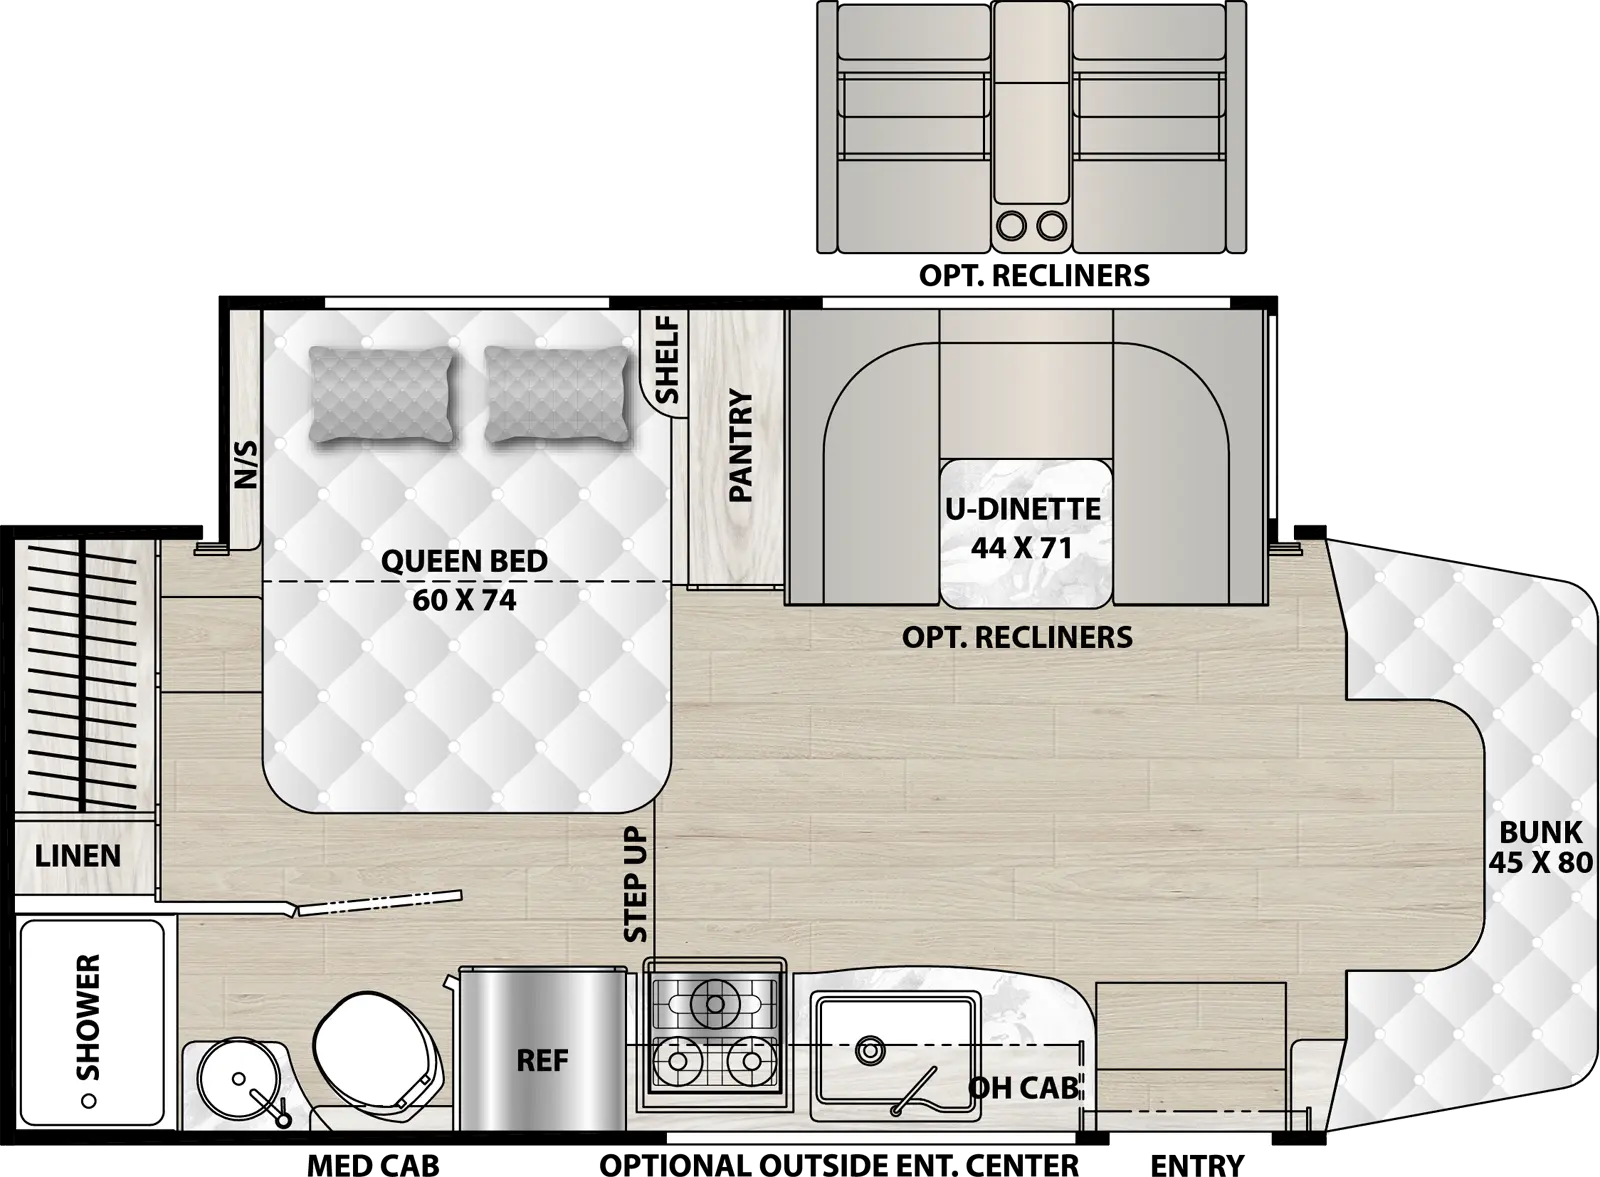 The Prism 24FSS has 1 slideout located on the off-door side and 1 entry door. Interior layout from front to back; front 45 inch by 80 inch bunk; door side kitchen with stovetop with microwave, overhead cabinets, single sink, and refrigerator; off-door  44 inch by 71 inch U-dinette, next to slide out entertainment center and pantry; step up; rear off-door side 60 inch by 74 inch foot facing full bed with night stand and shelf; rear door side bathroom with shower, sink, toilet, medicine cabinet and linen. Optional Exterior door side entertainment center; optional recliners in place of dinette.